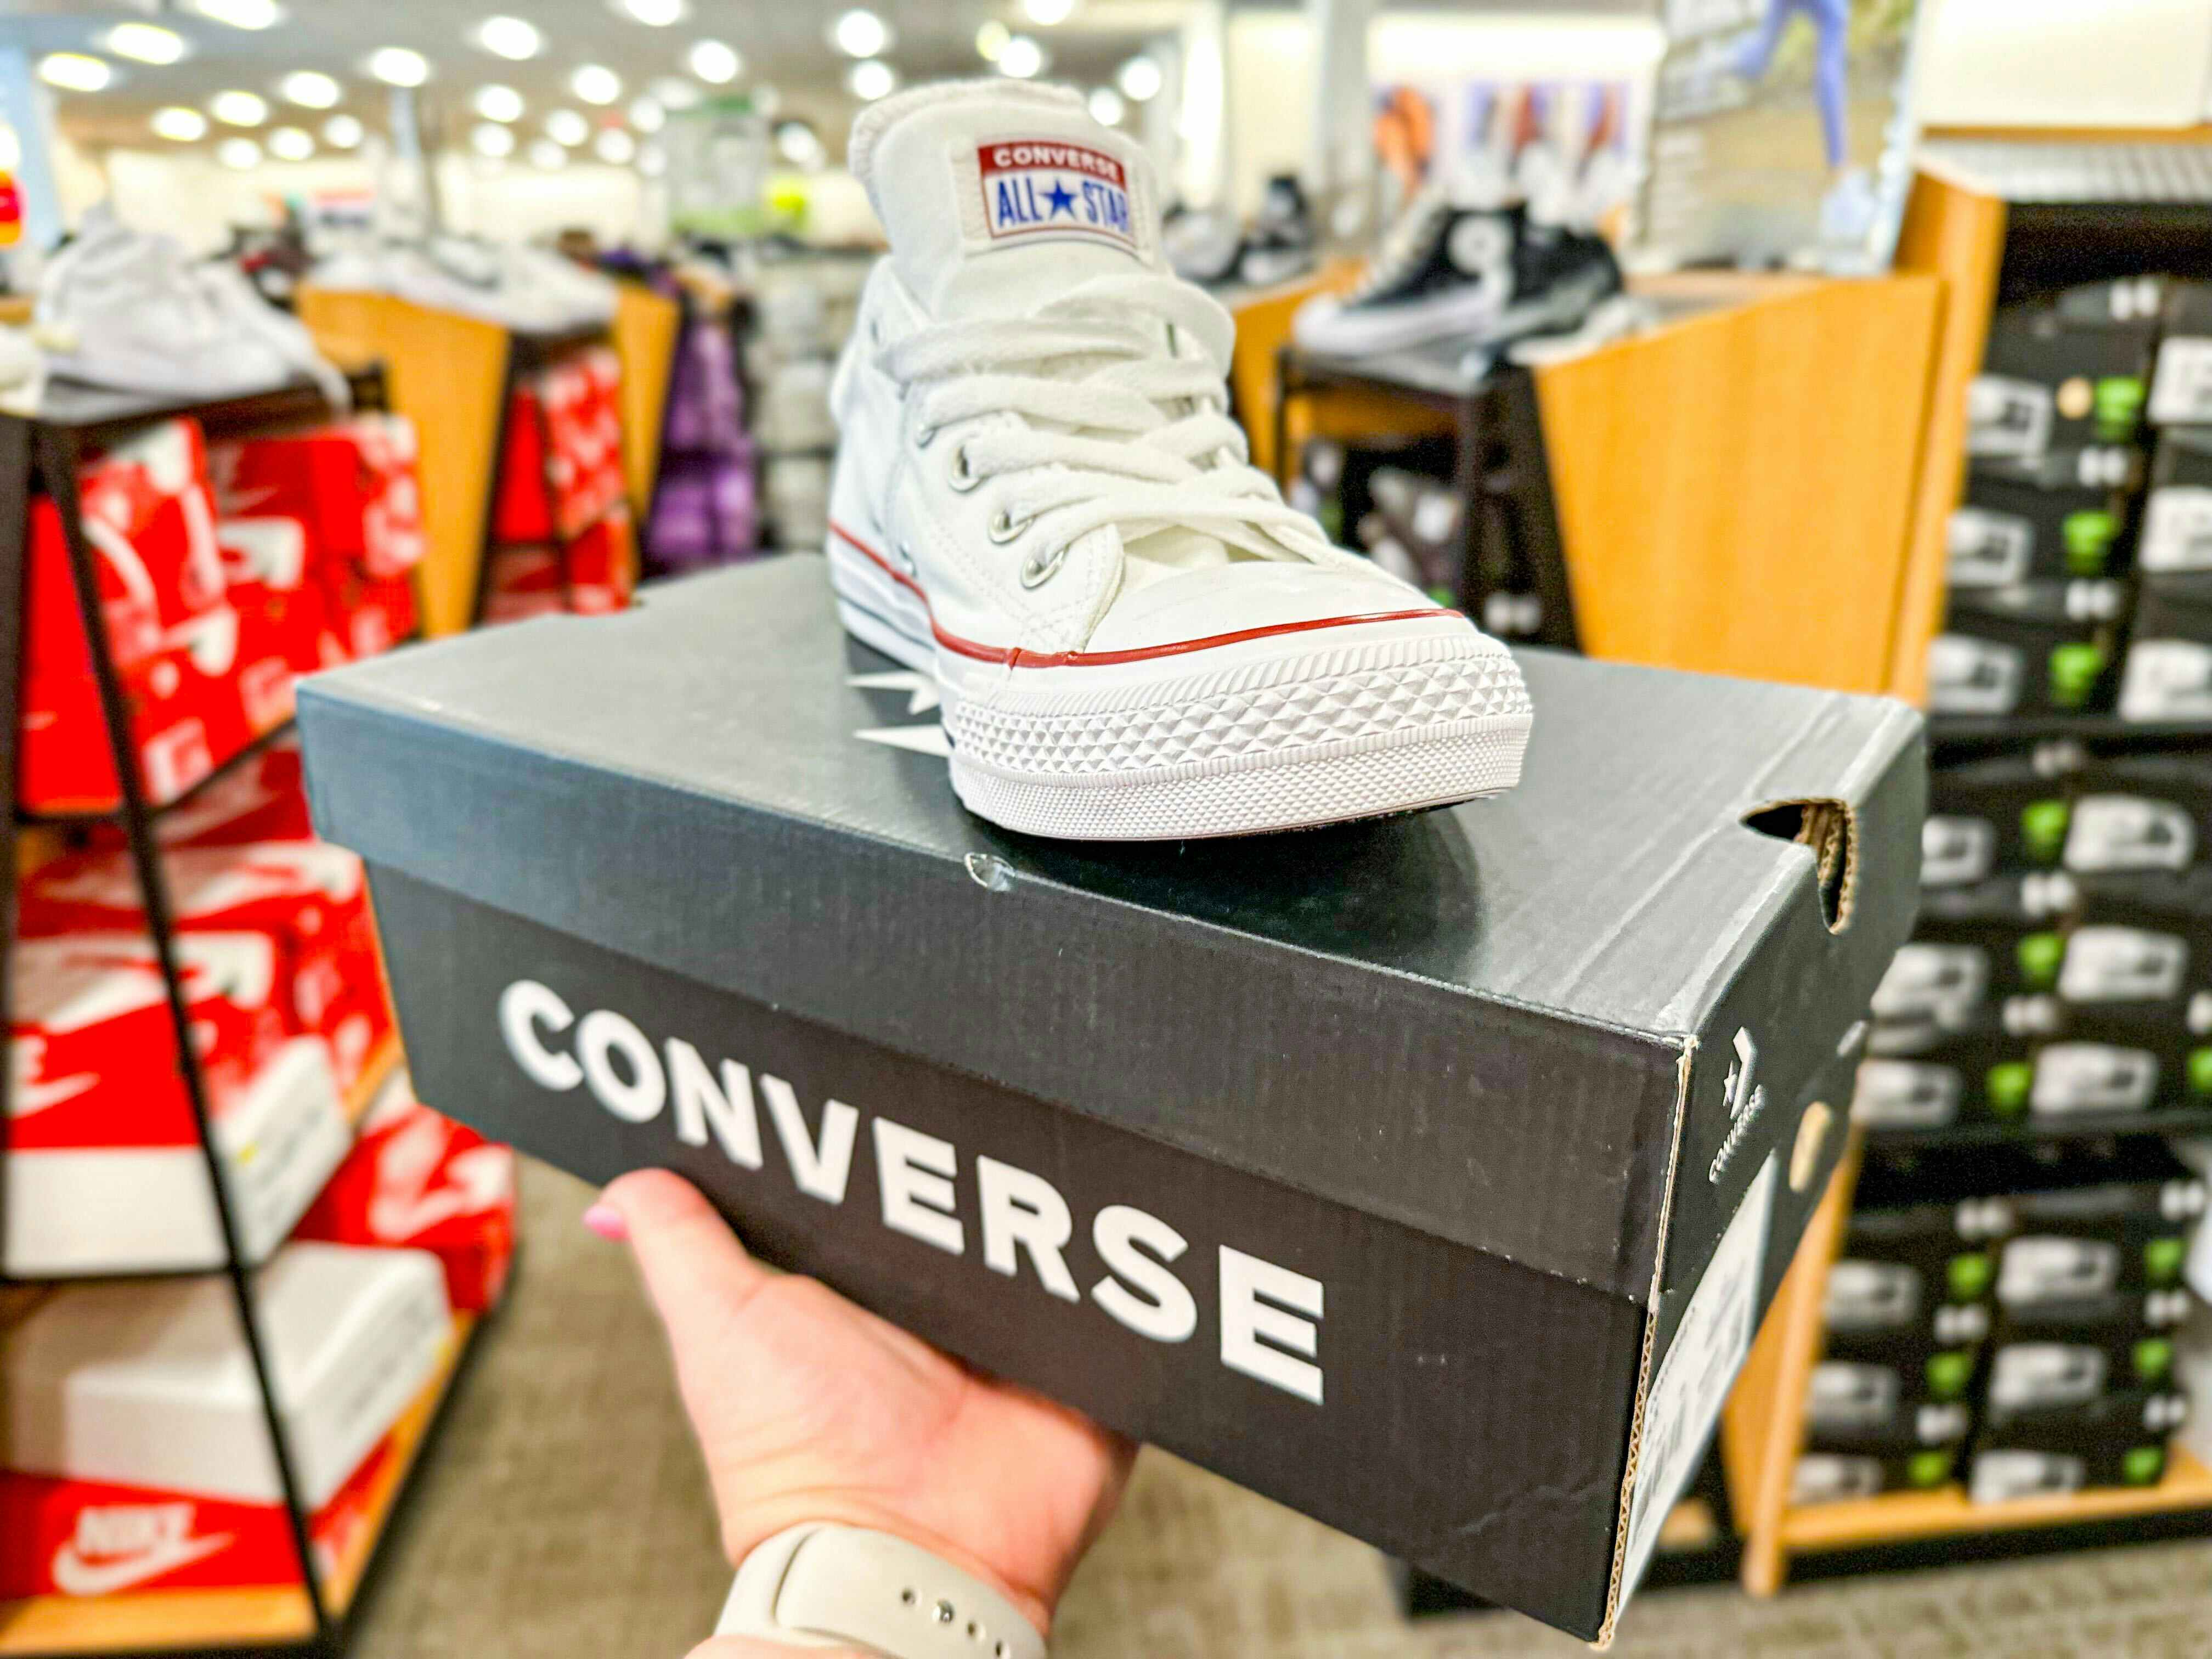 Sneaker Sale at Converse: Score $18 Kid and $24 Adult Options